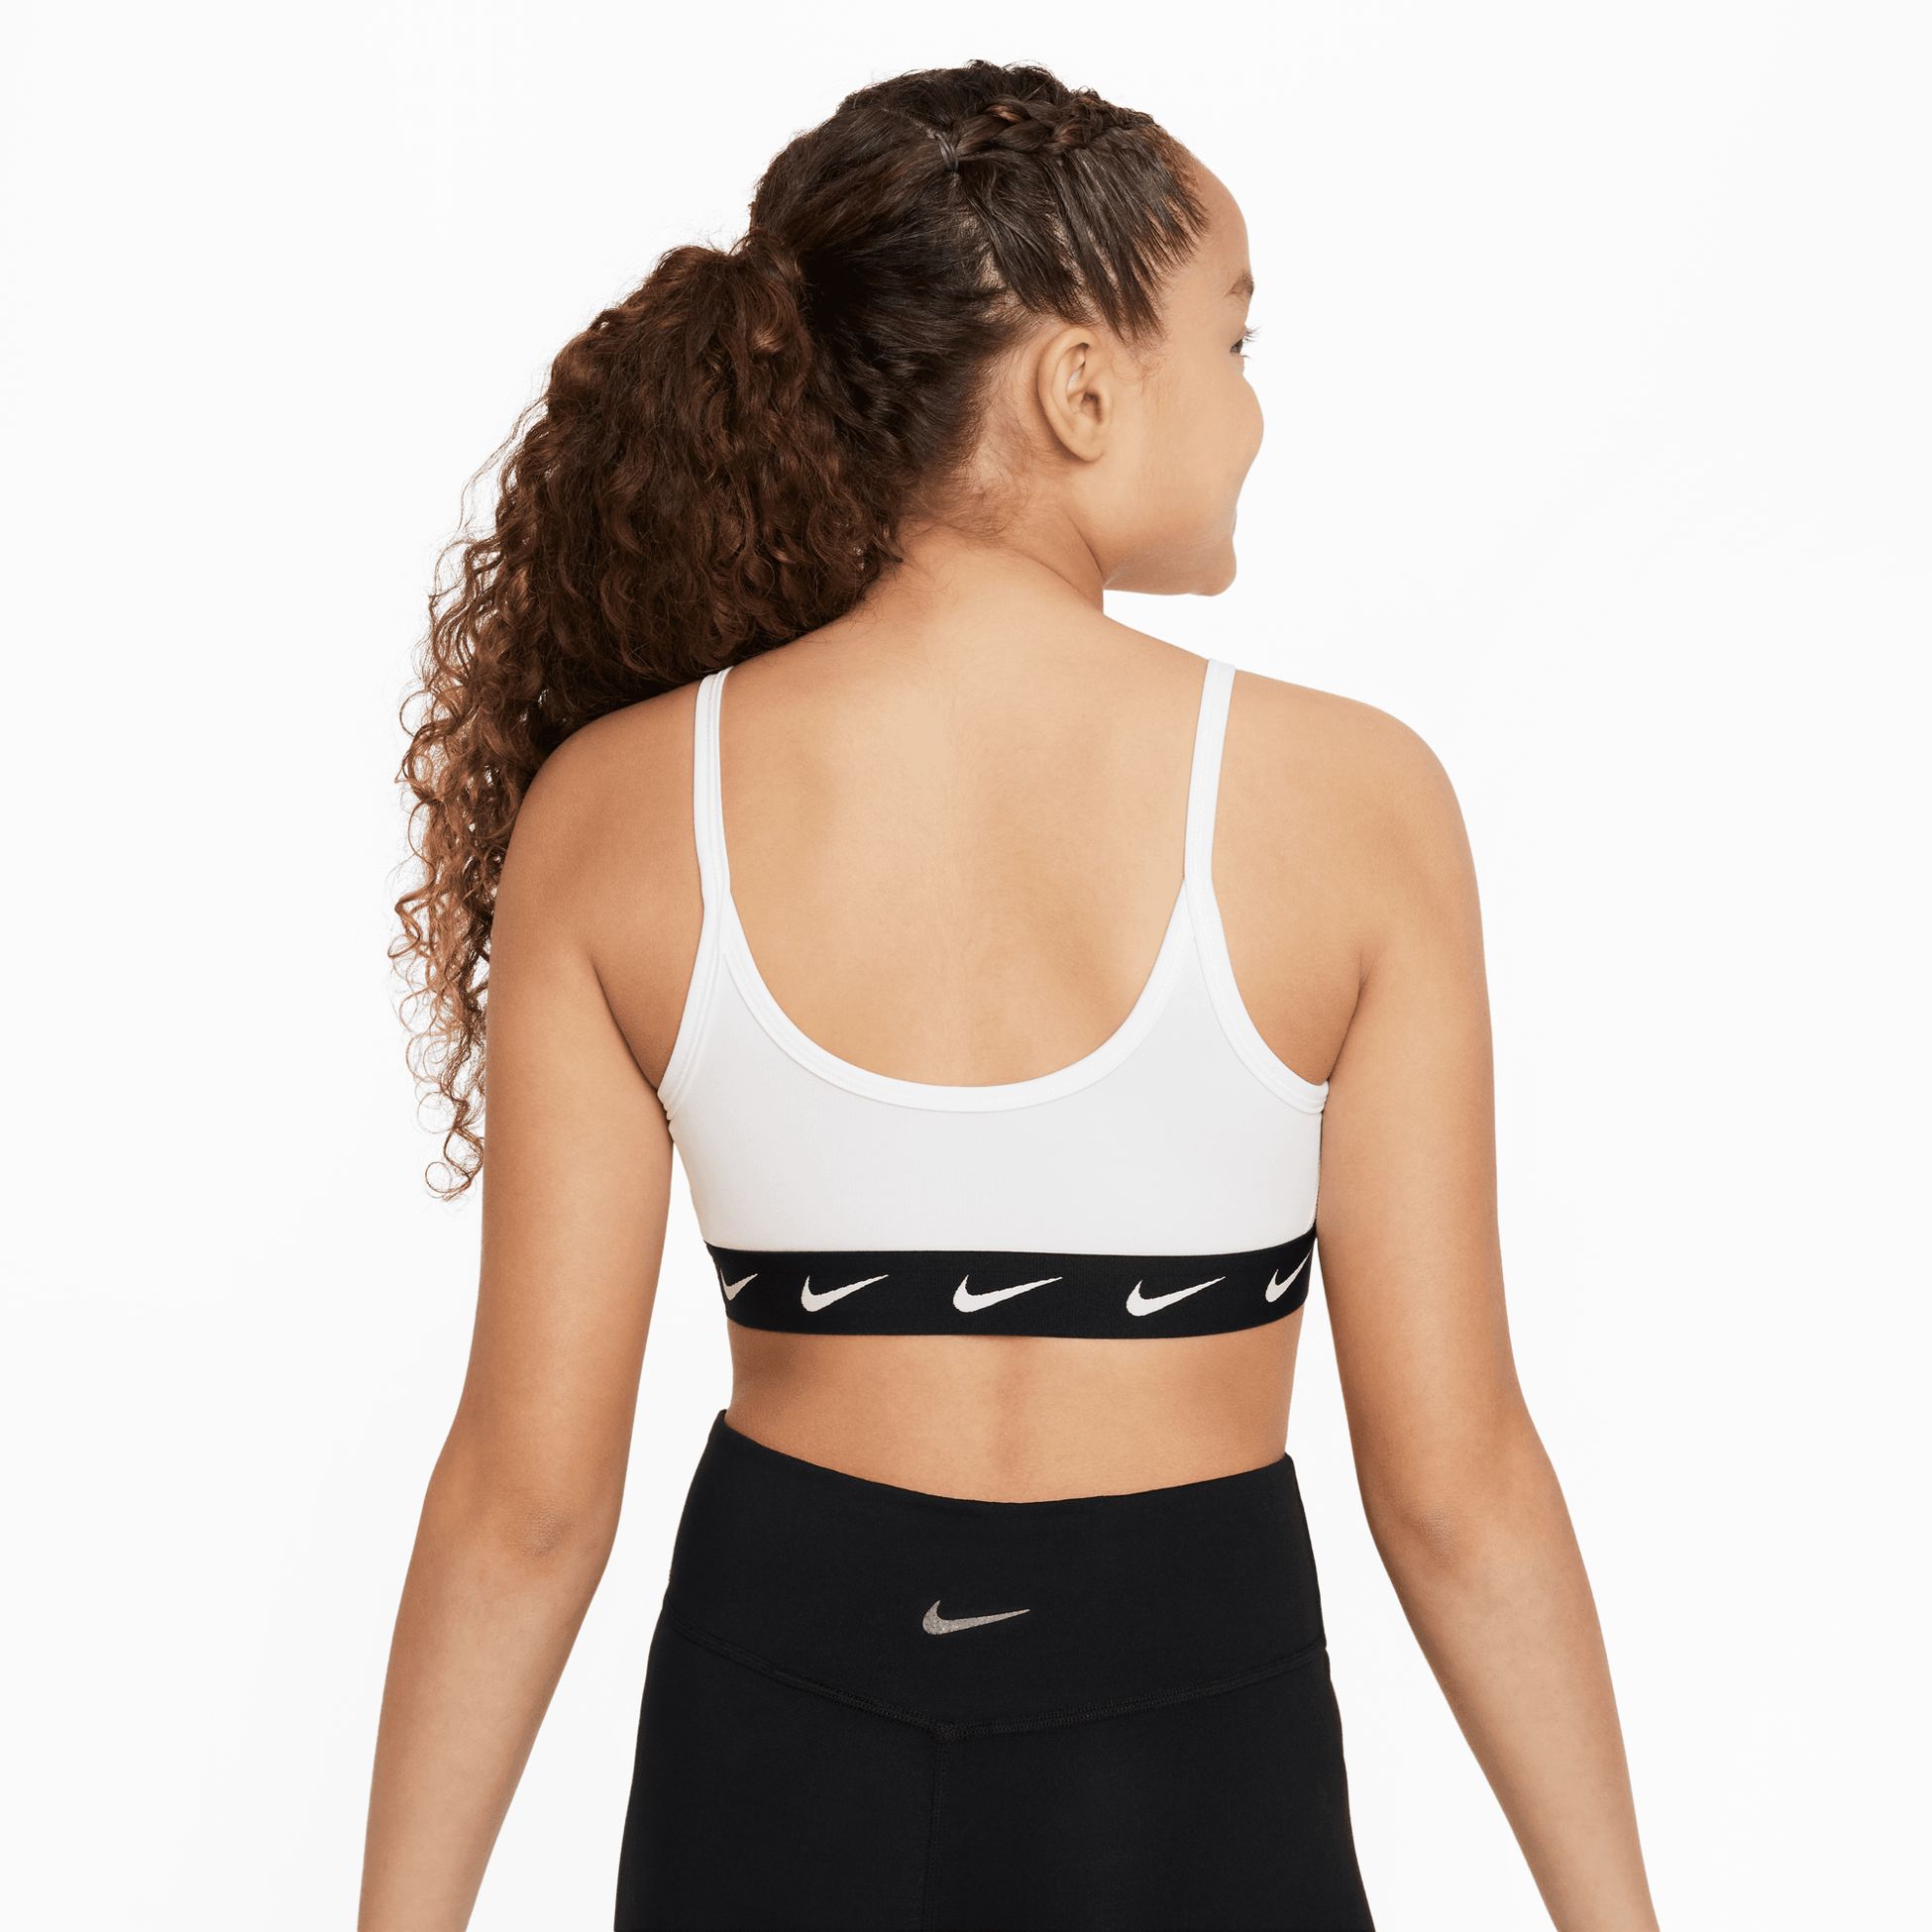 NIKE, G DF ONE TOP